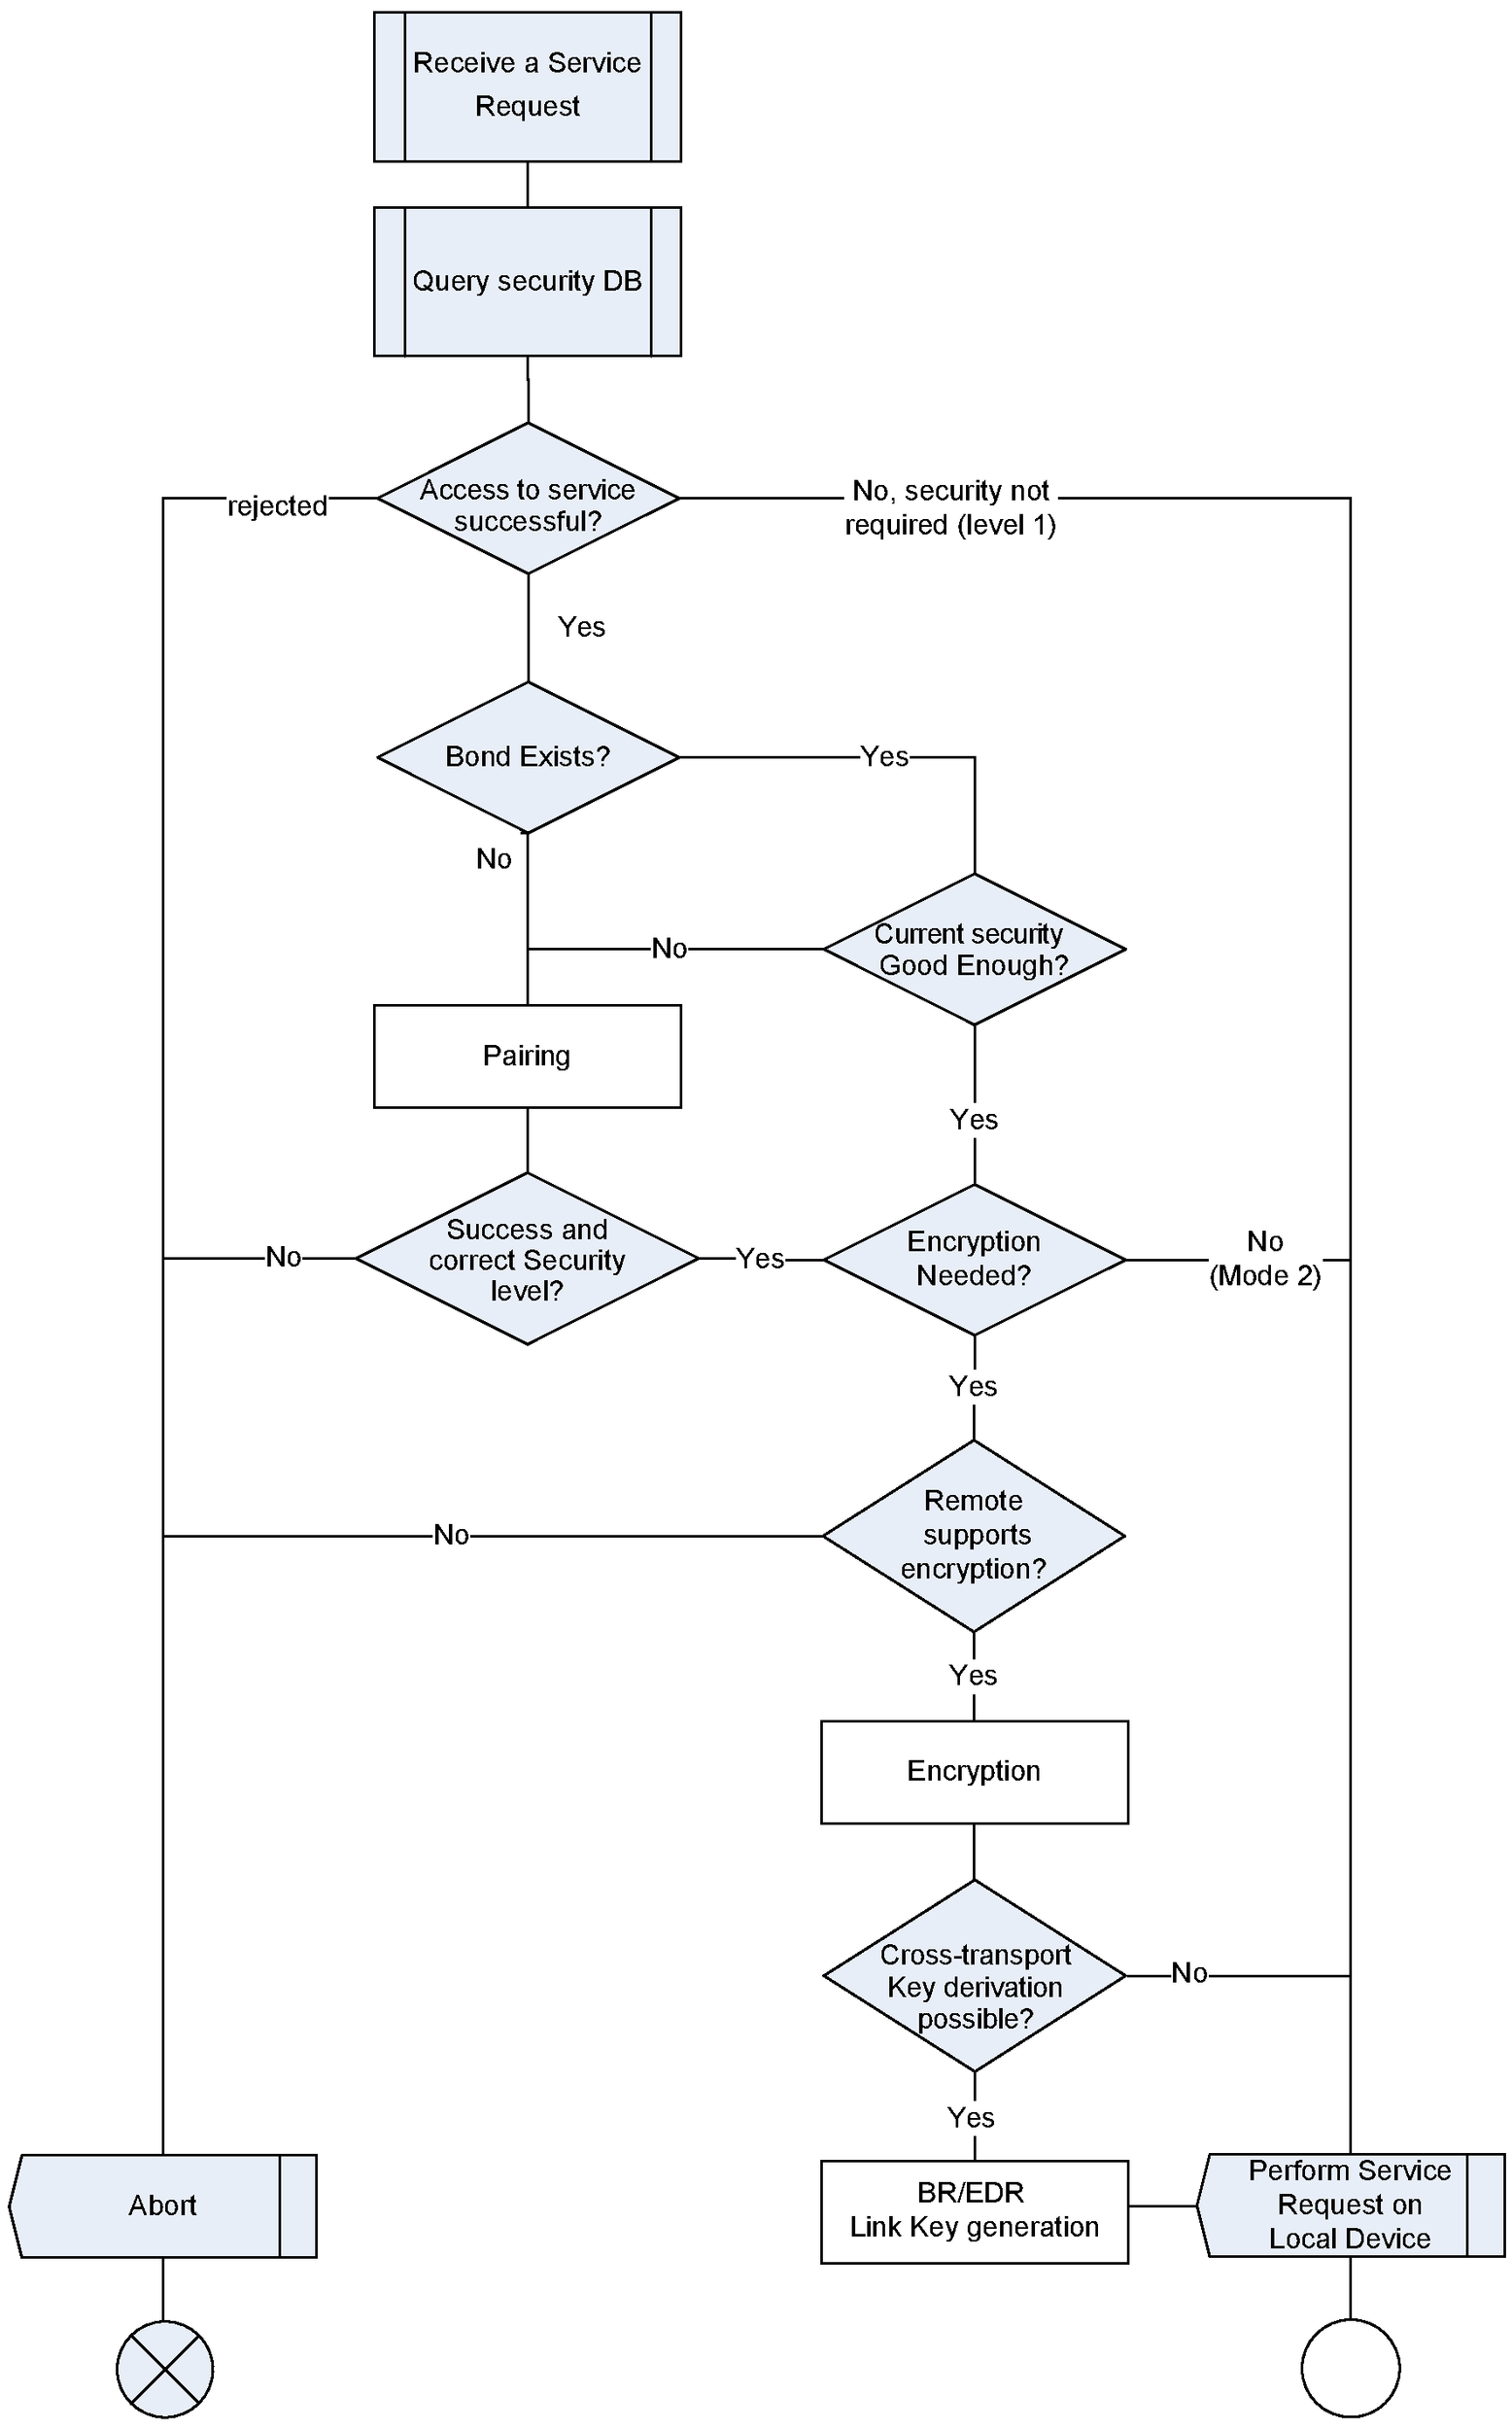 Flow chart for a local device handling a service request from a remote device